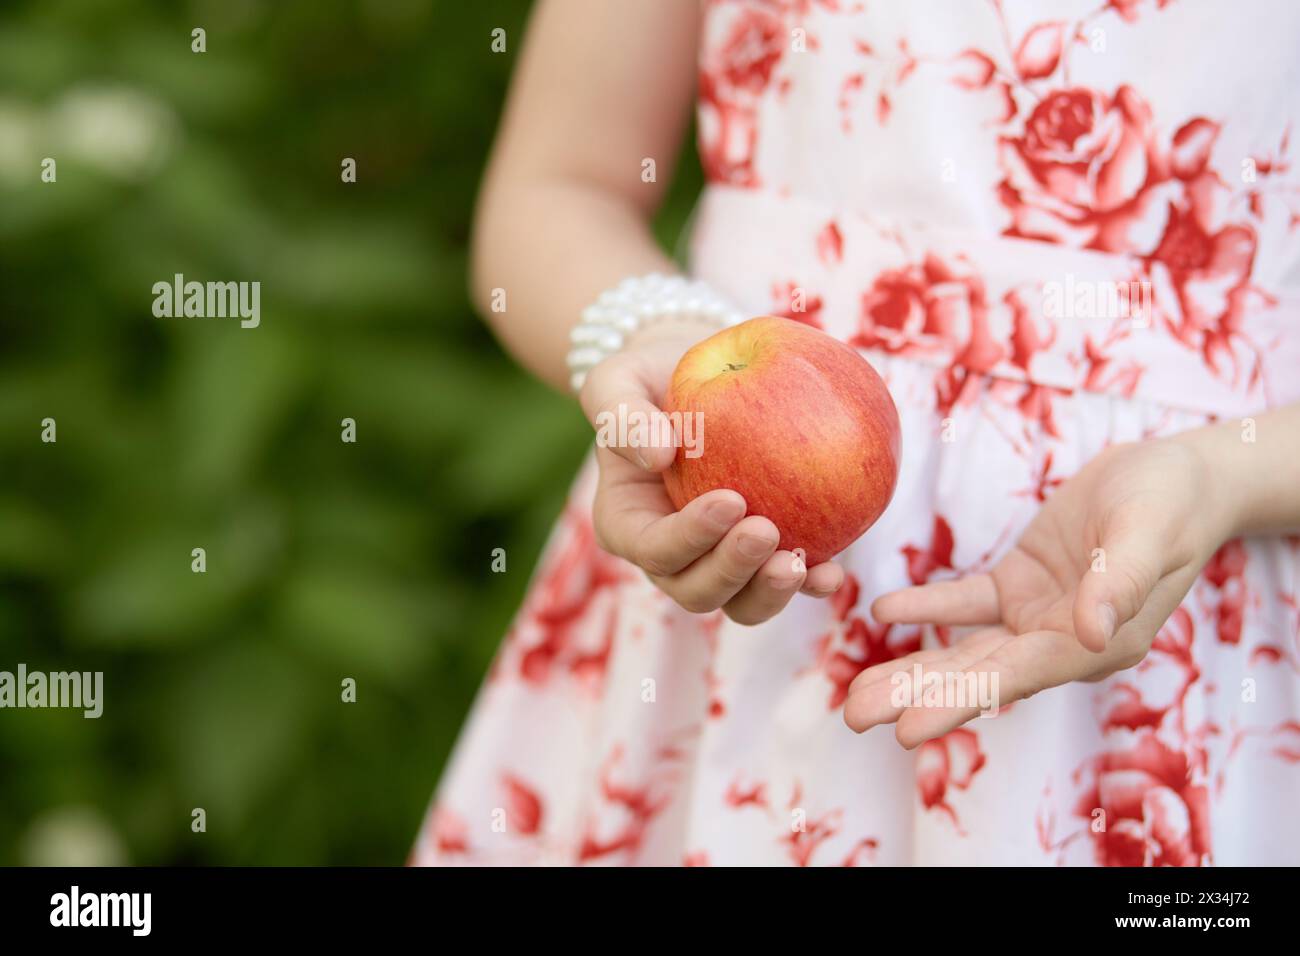 Hands of girl in flowery dress holding red apple outdoor. Stock Photo